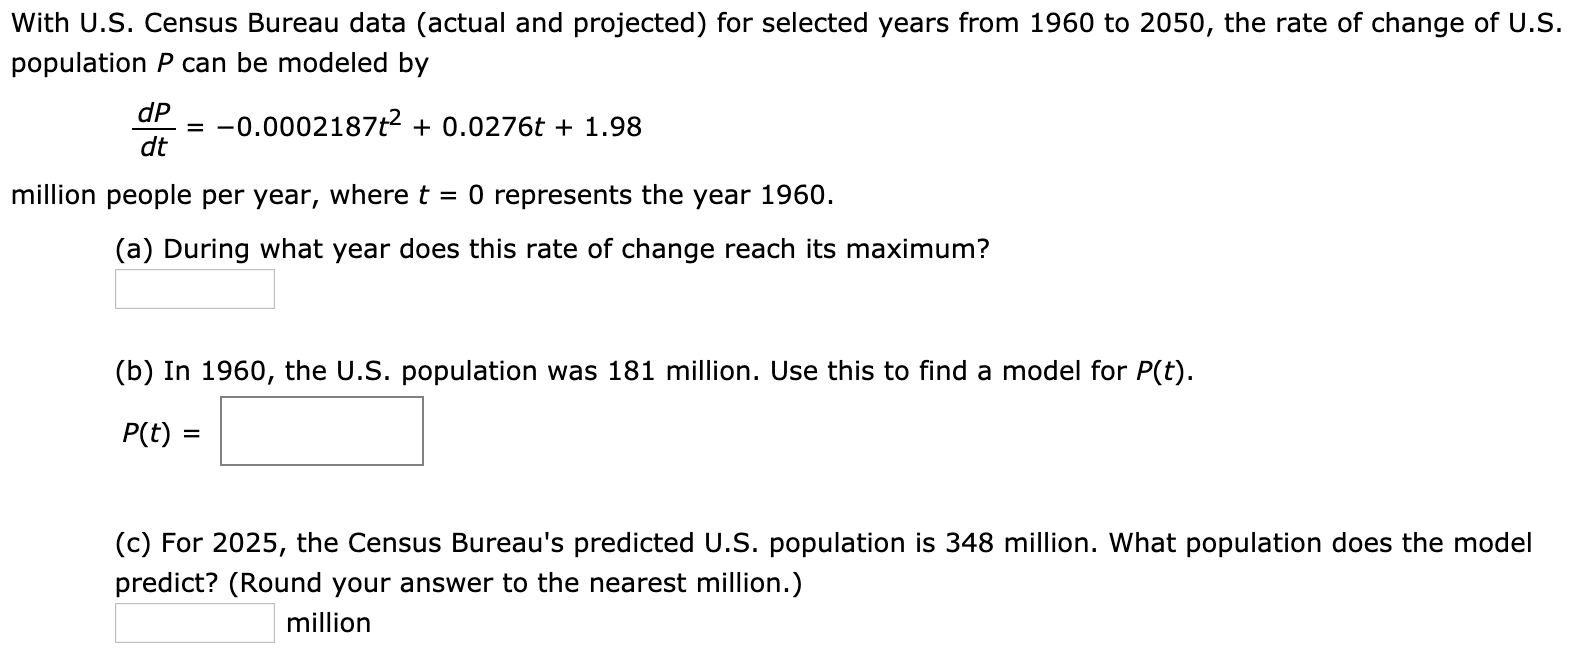 With U.S. Census Bureau data (actual and projected) for selected years from 1960 to 2050, the rate of change of U.S.
population P can be modeled by
dP
= -0.0002187t2 + 0.0276t + 1.98
dt
O represents the year 1960.
million people per year, where t
(a) During what year does this rate of change reach its maximum?
(b) In 1960, the U.S. population was 181 million. Use this to find a model for P(t).
P(t) =
(c) For 2025, the Census Bureau's predicted U.S. population is 348 million. What population does the model
predict? (Round your answer to the nearest million.)
million
